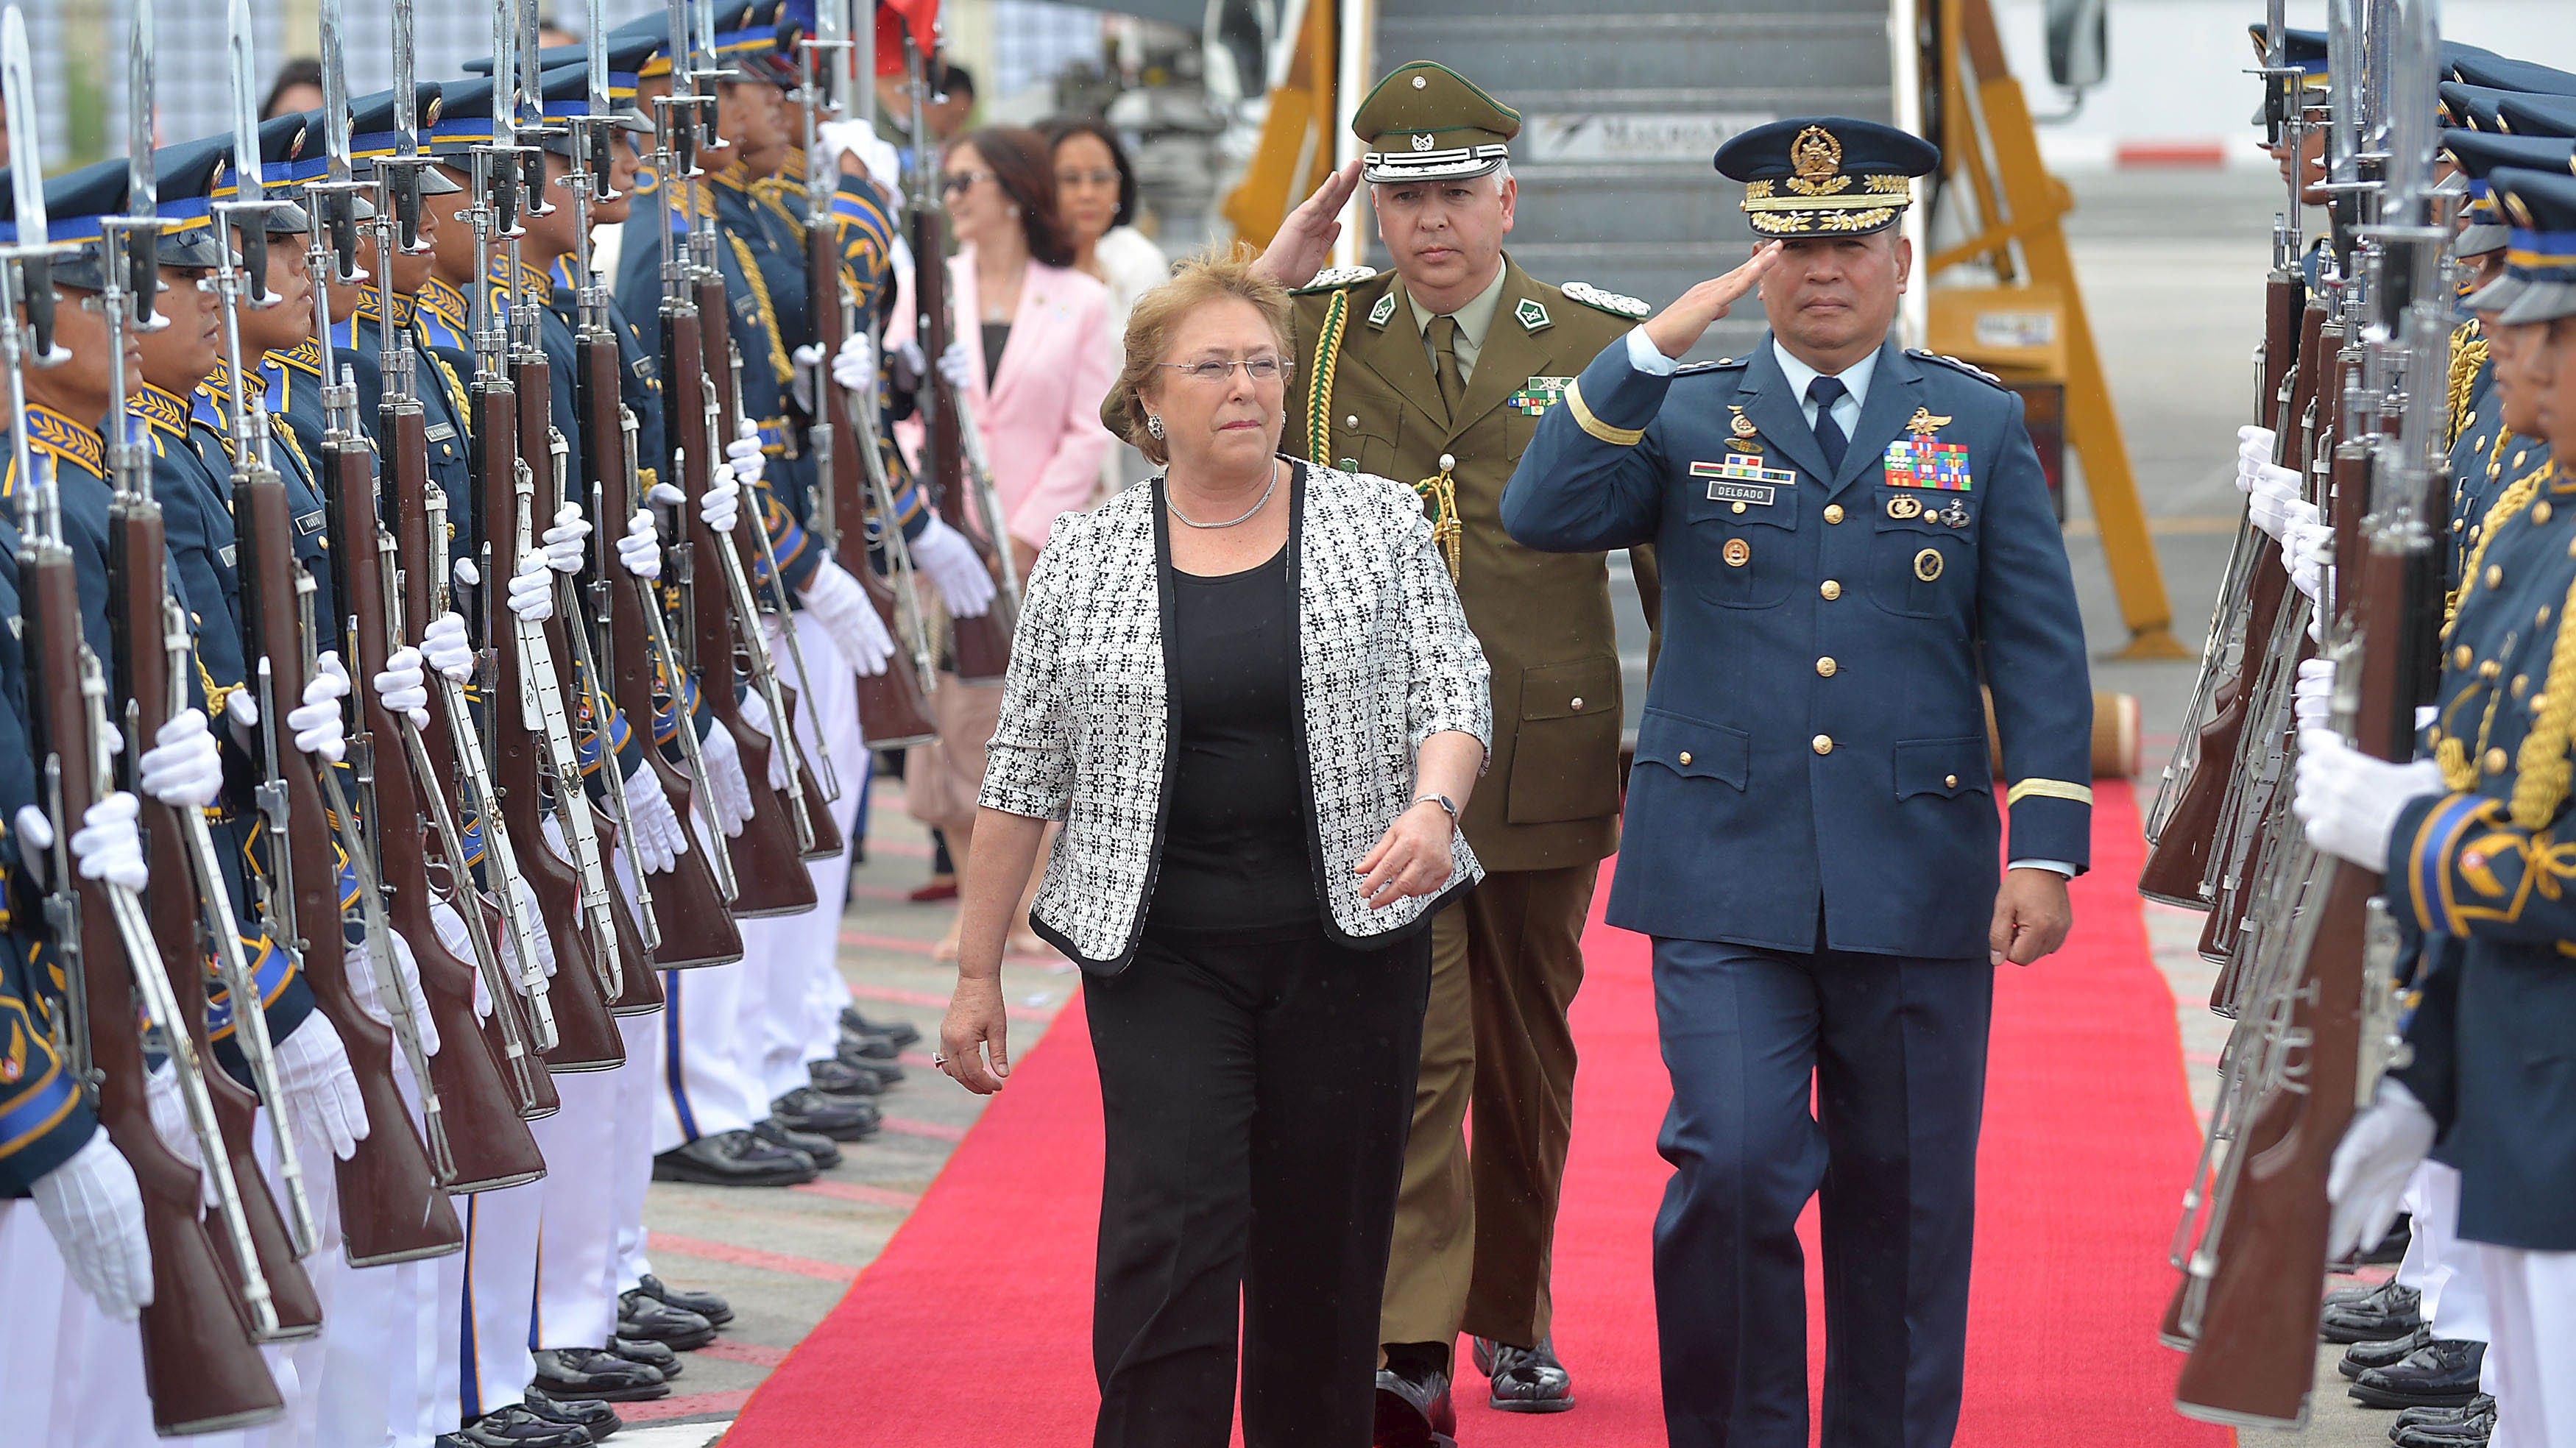 Chilean President Michelle Bachelet is accompanied by Philippine Air Force Chief Jeffrey Delgado (R) upon arriving in Manila Nov. 15, 2015.